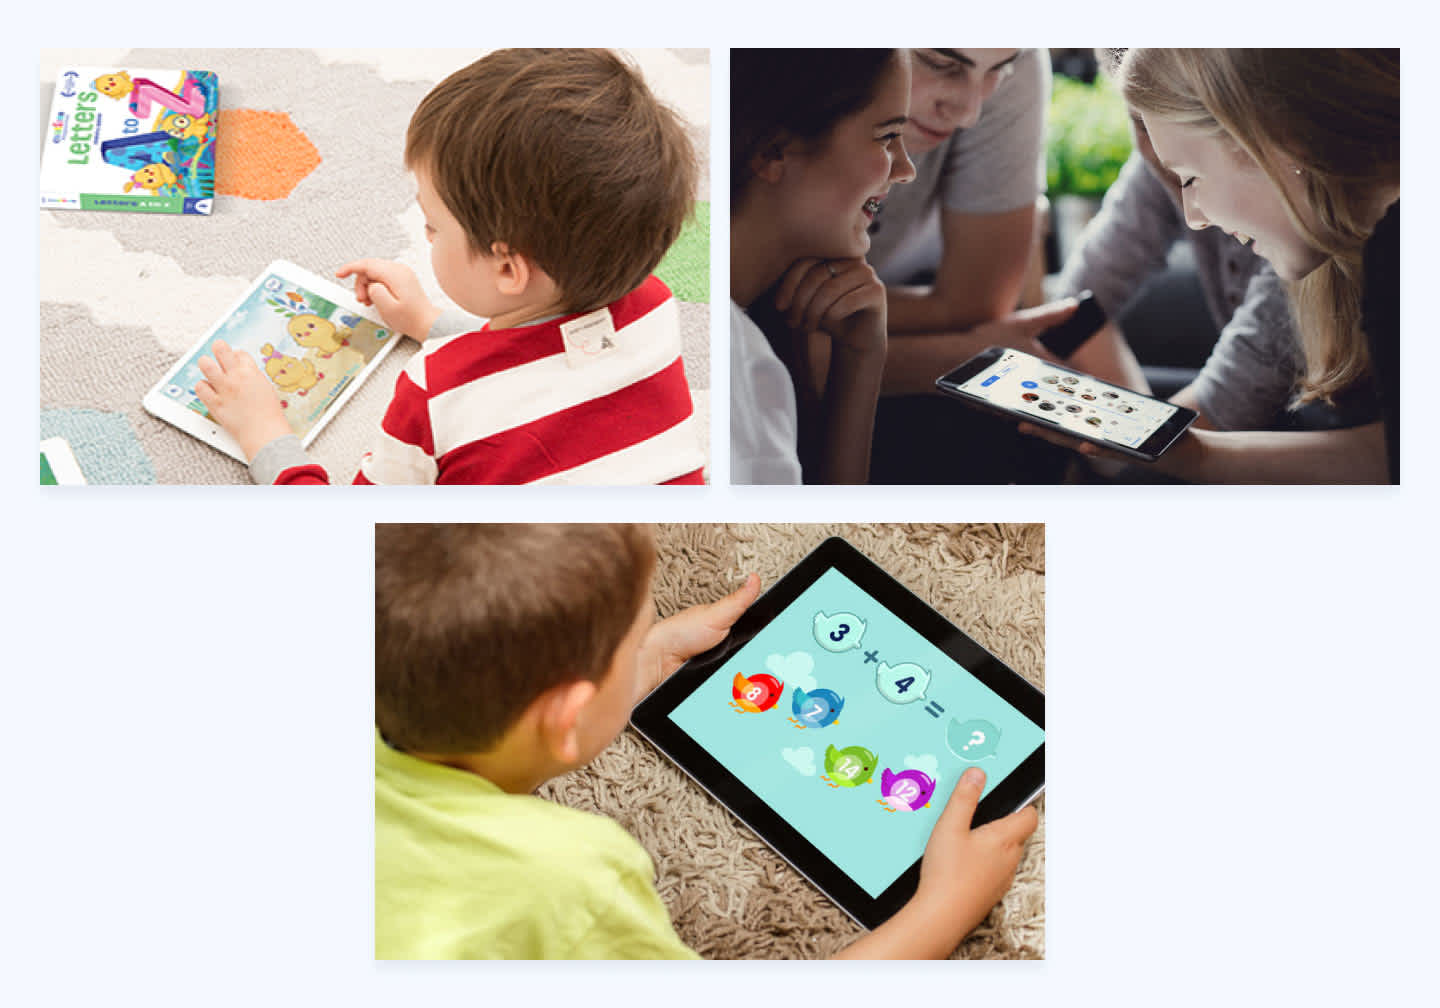 UI/UX design for kids of different ages